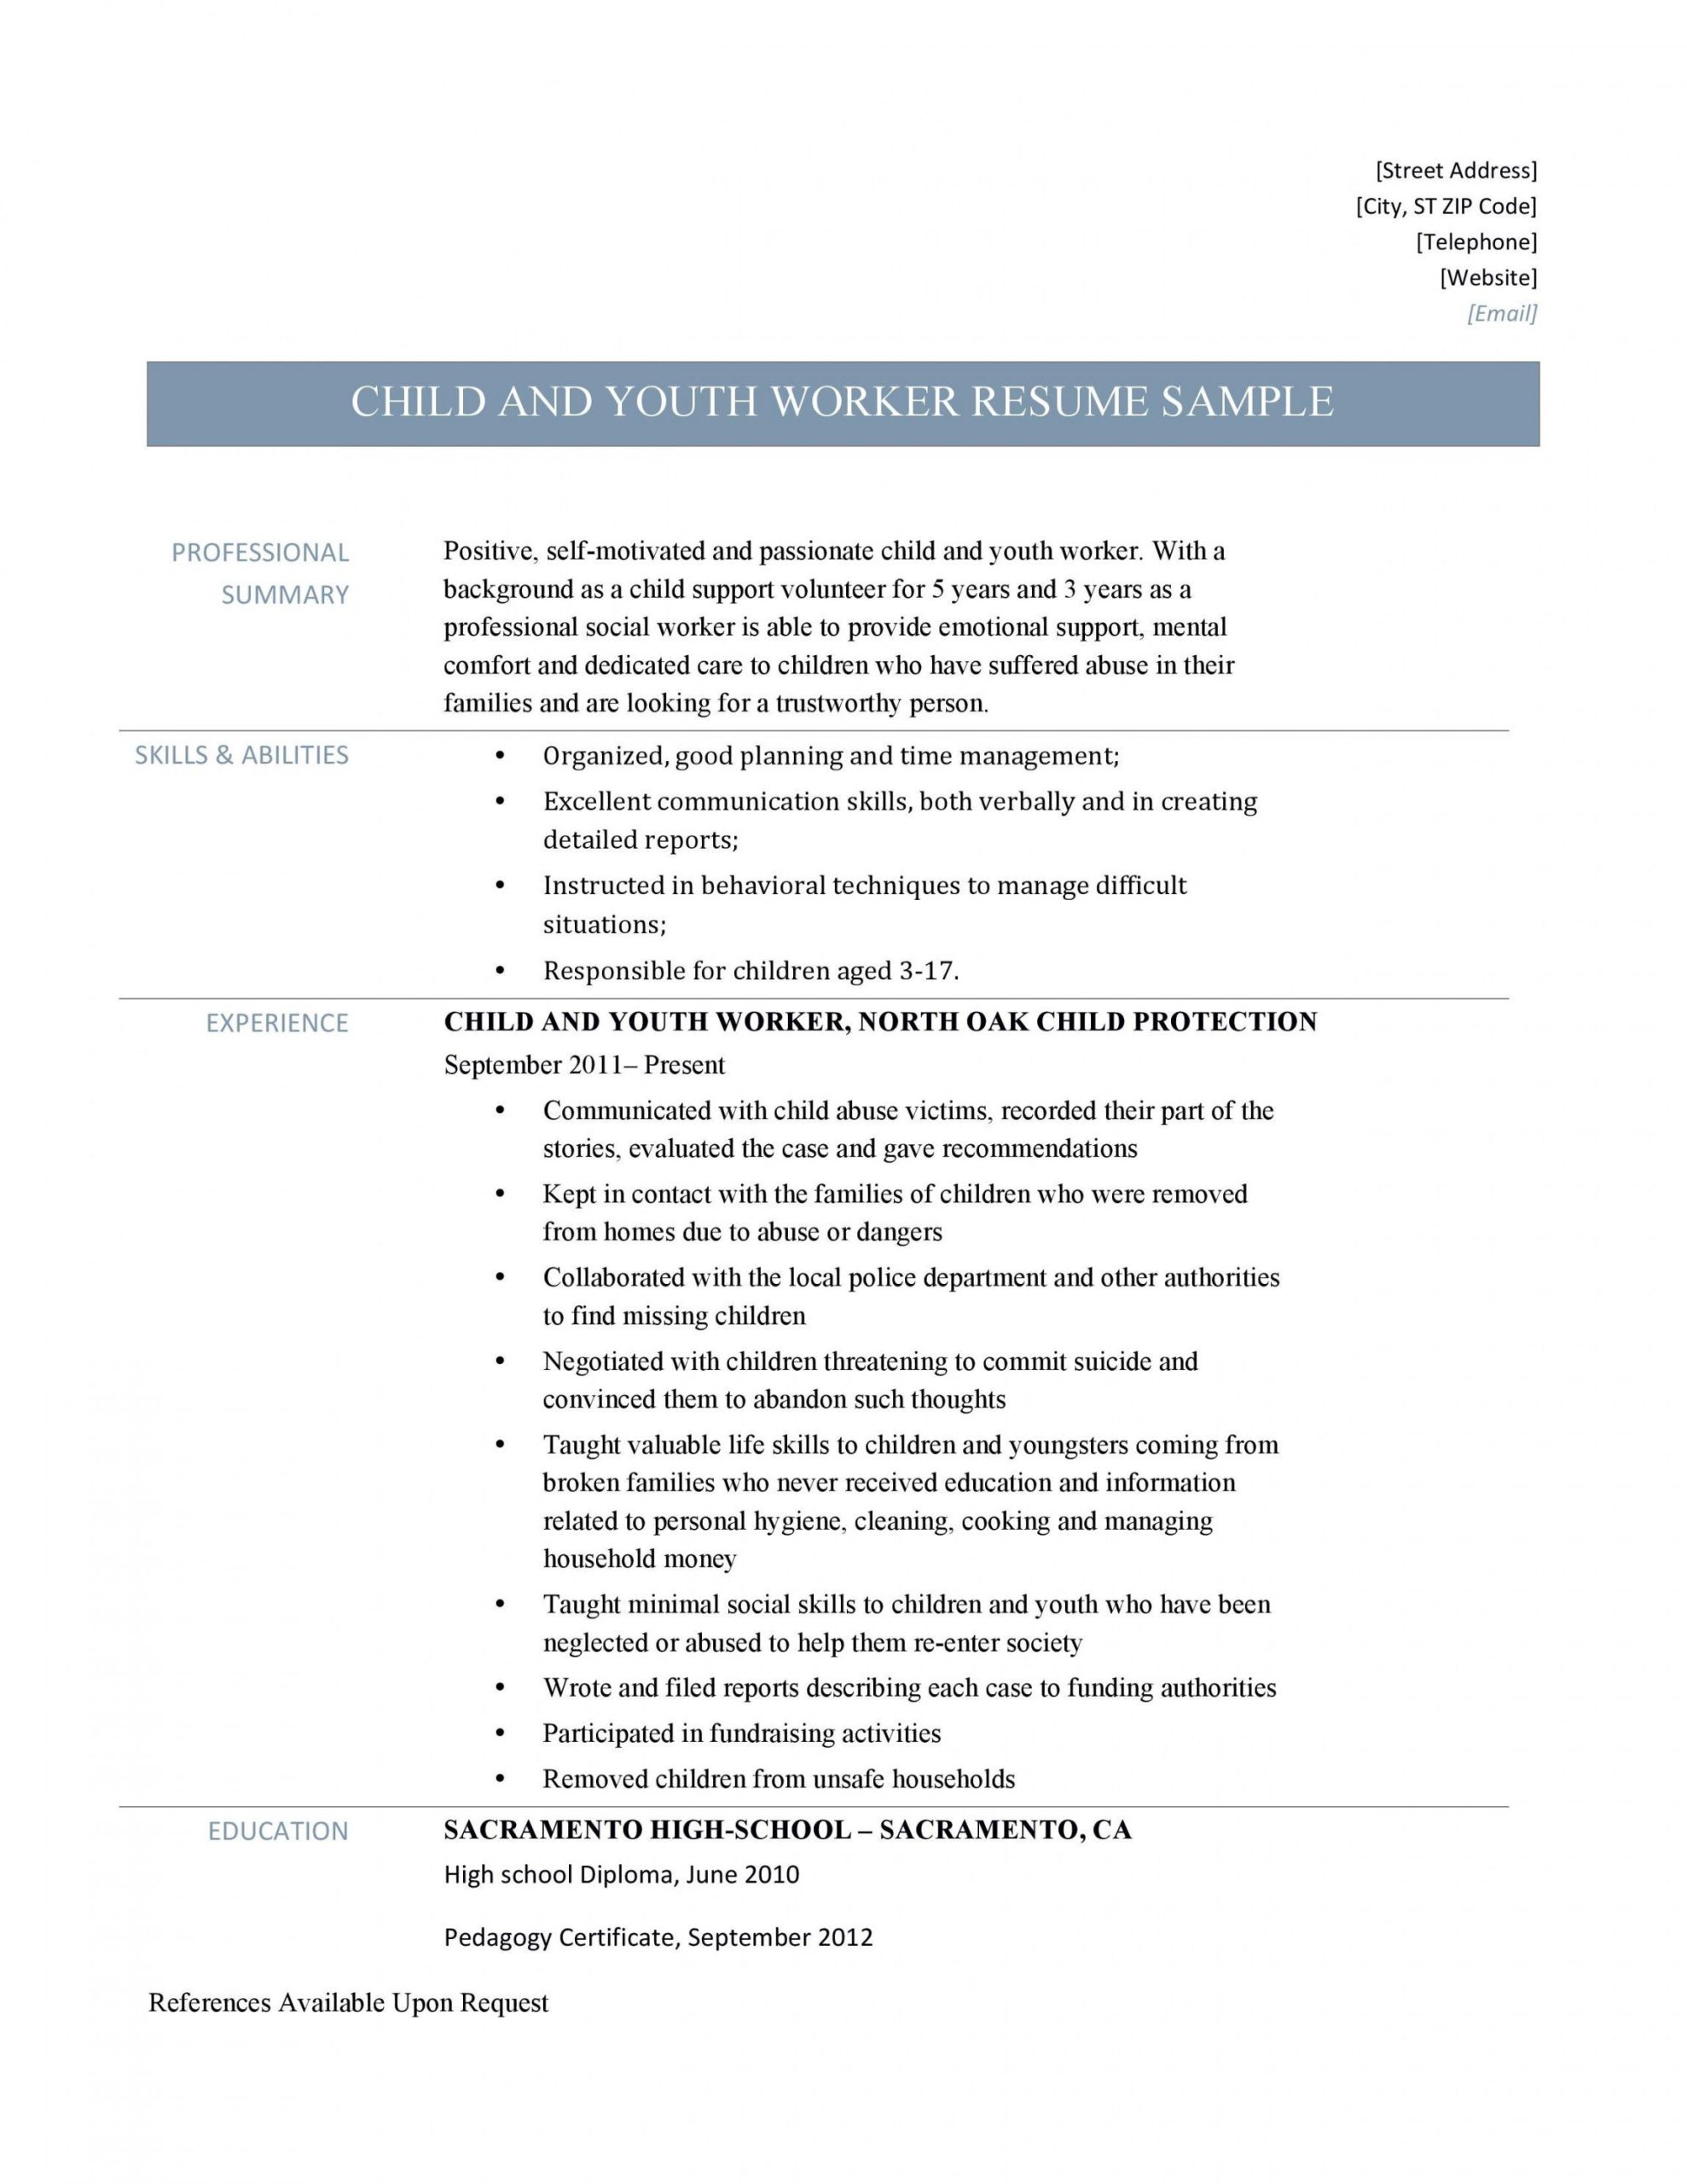 Child and Youth Worker Resume Samples Youth Worker Job Description Template Pdf Job Description …